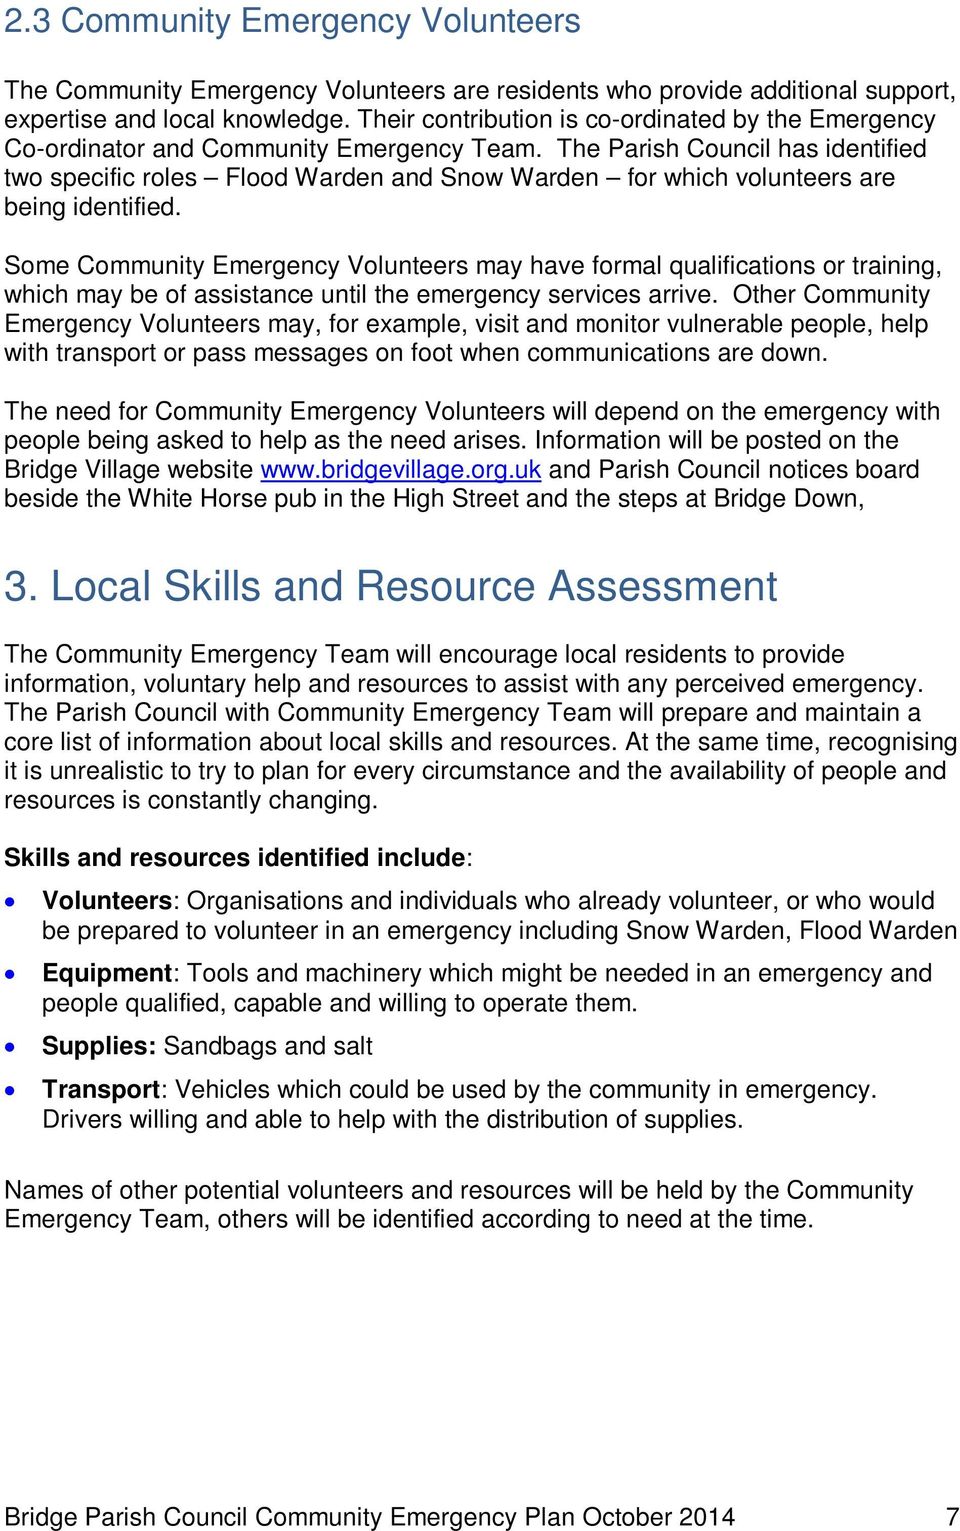 The Parish Council has identified two specific roles Flood Warden and Snow Warden for which volunteers are being identified.